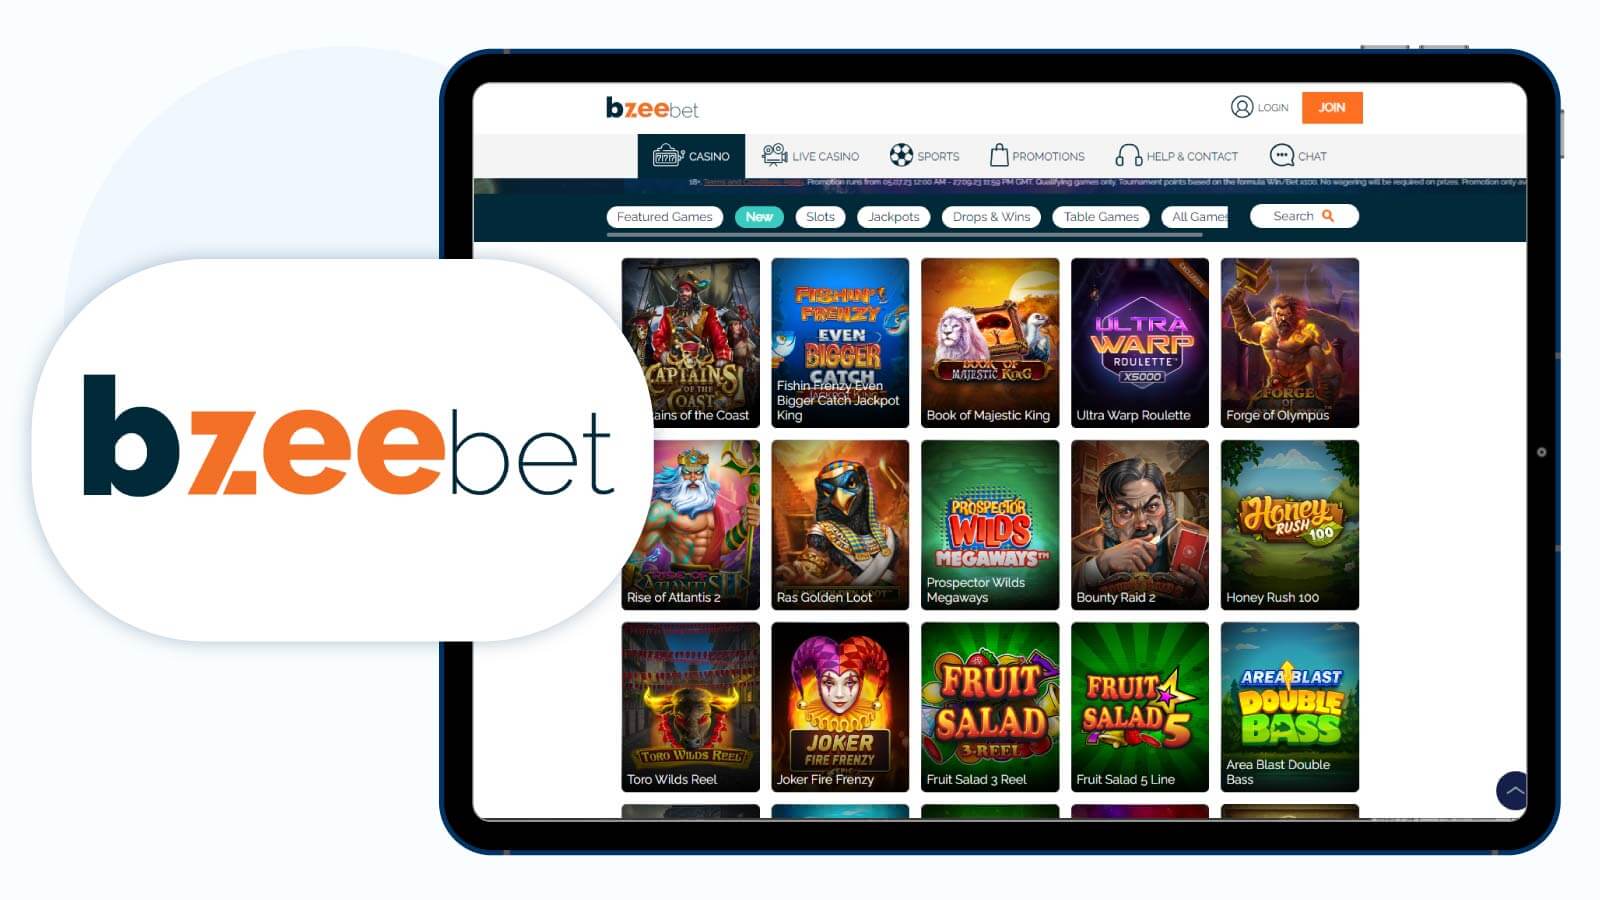 Bzeebet Casino– Fastest Casino Payout Time with PayPal